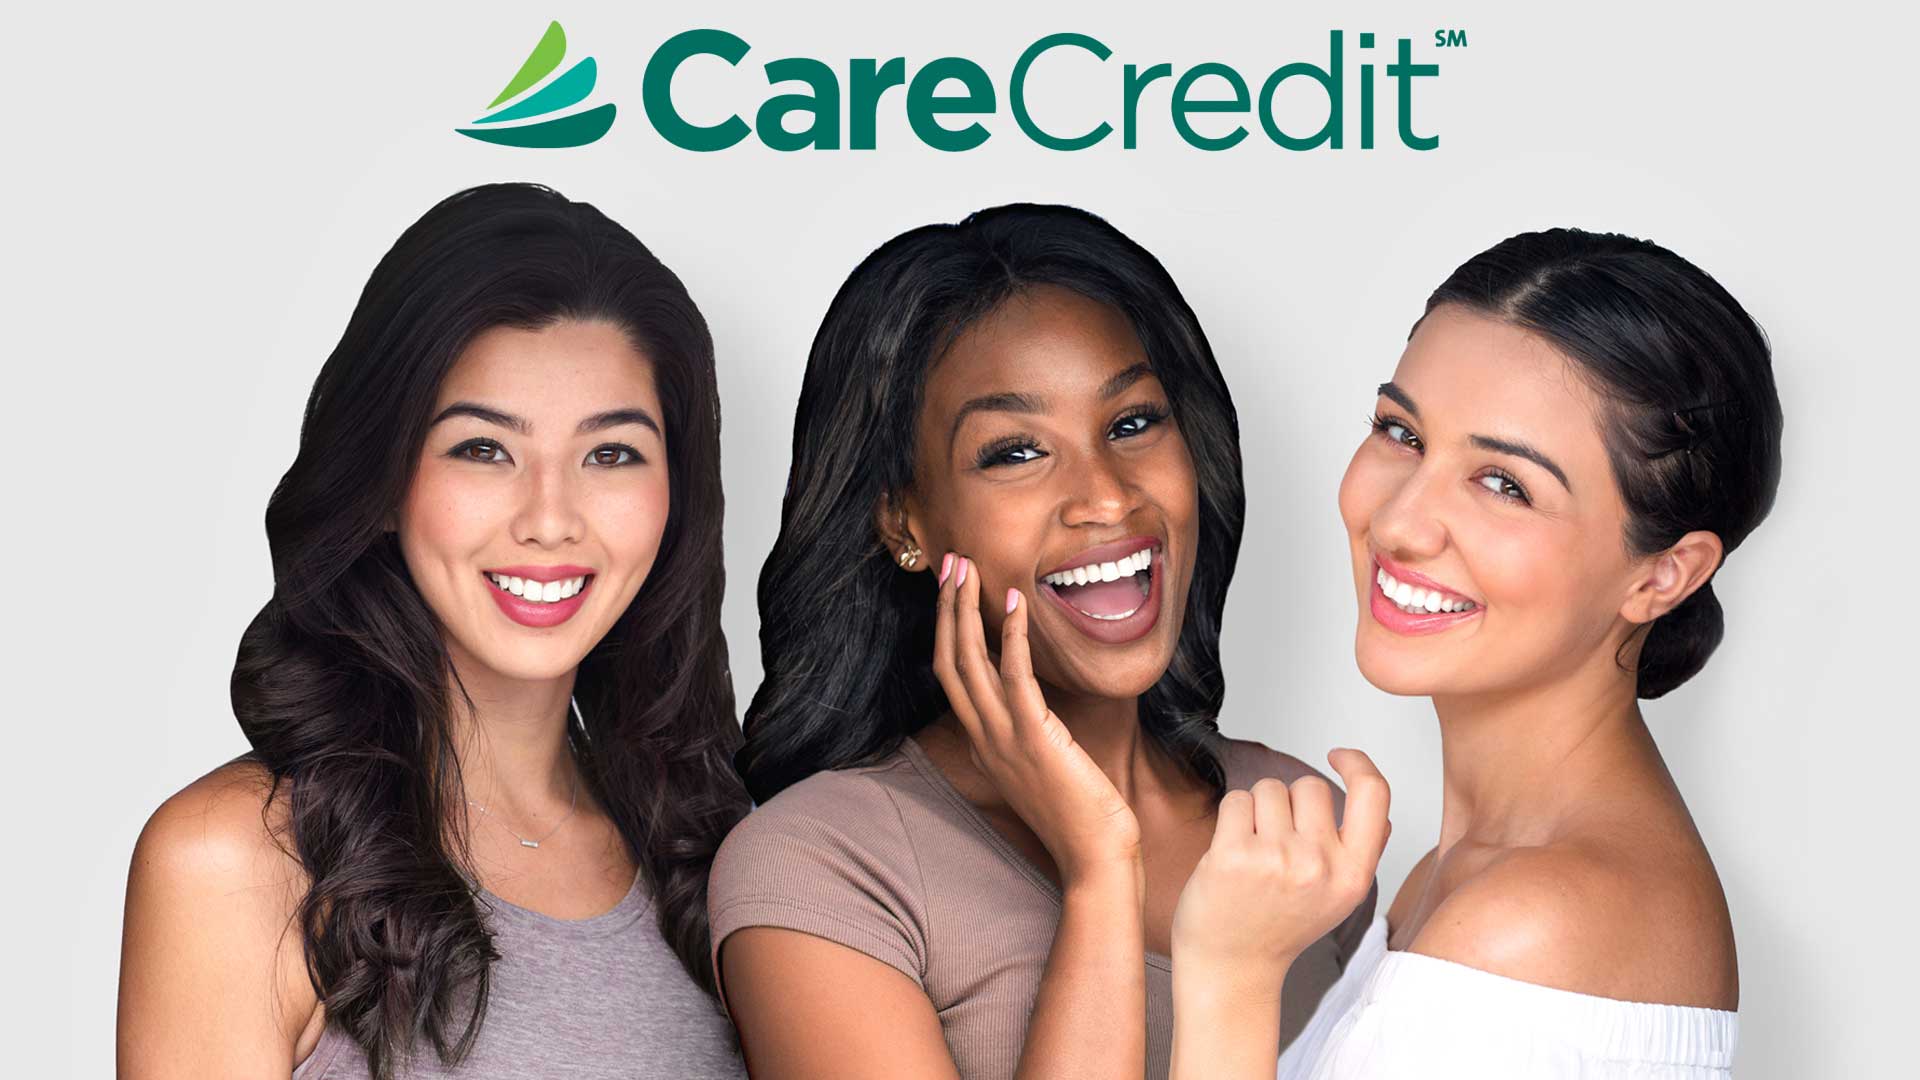 Cover it with CareCredit®